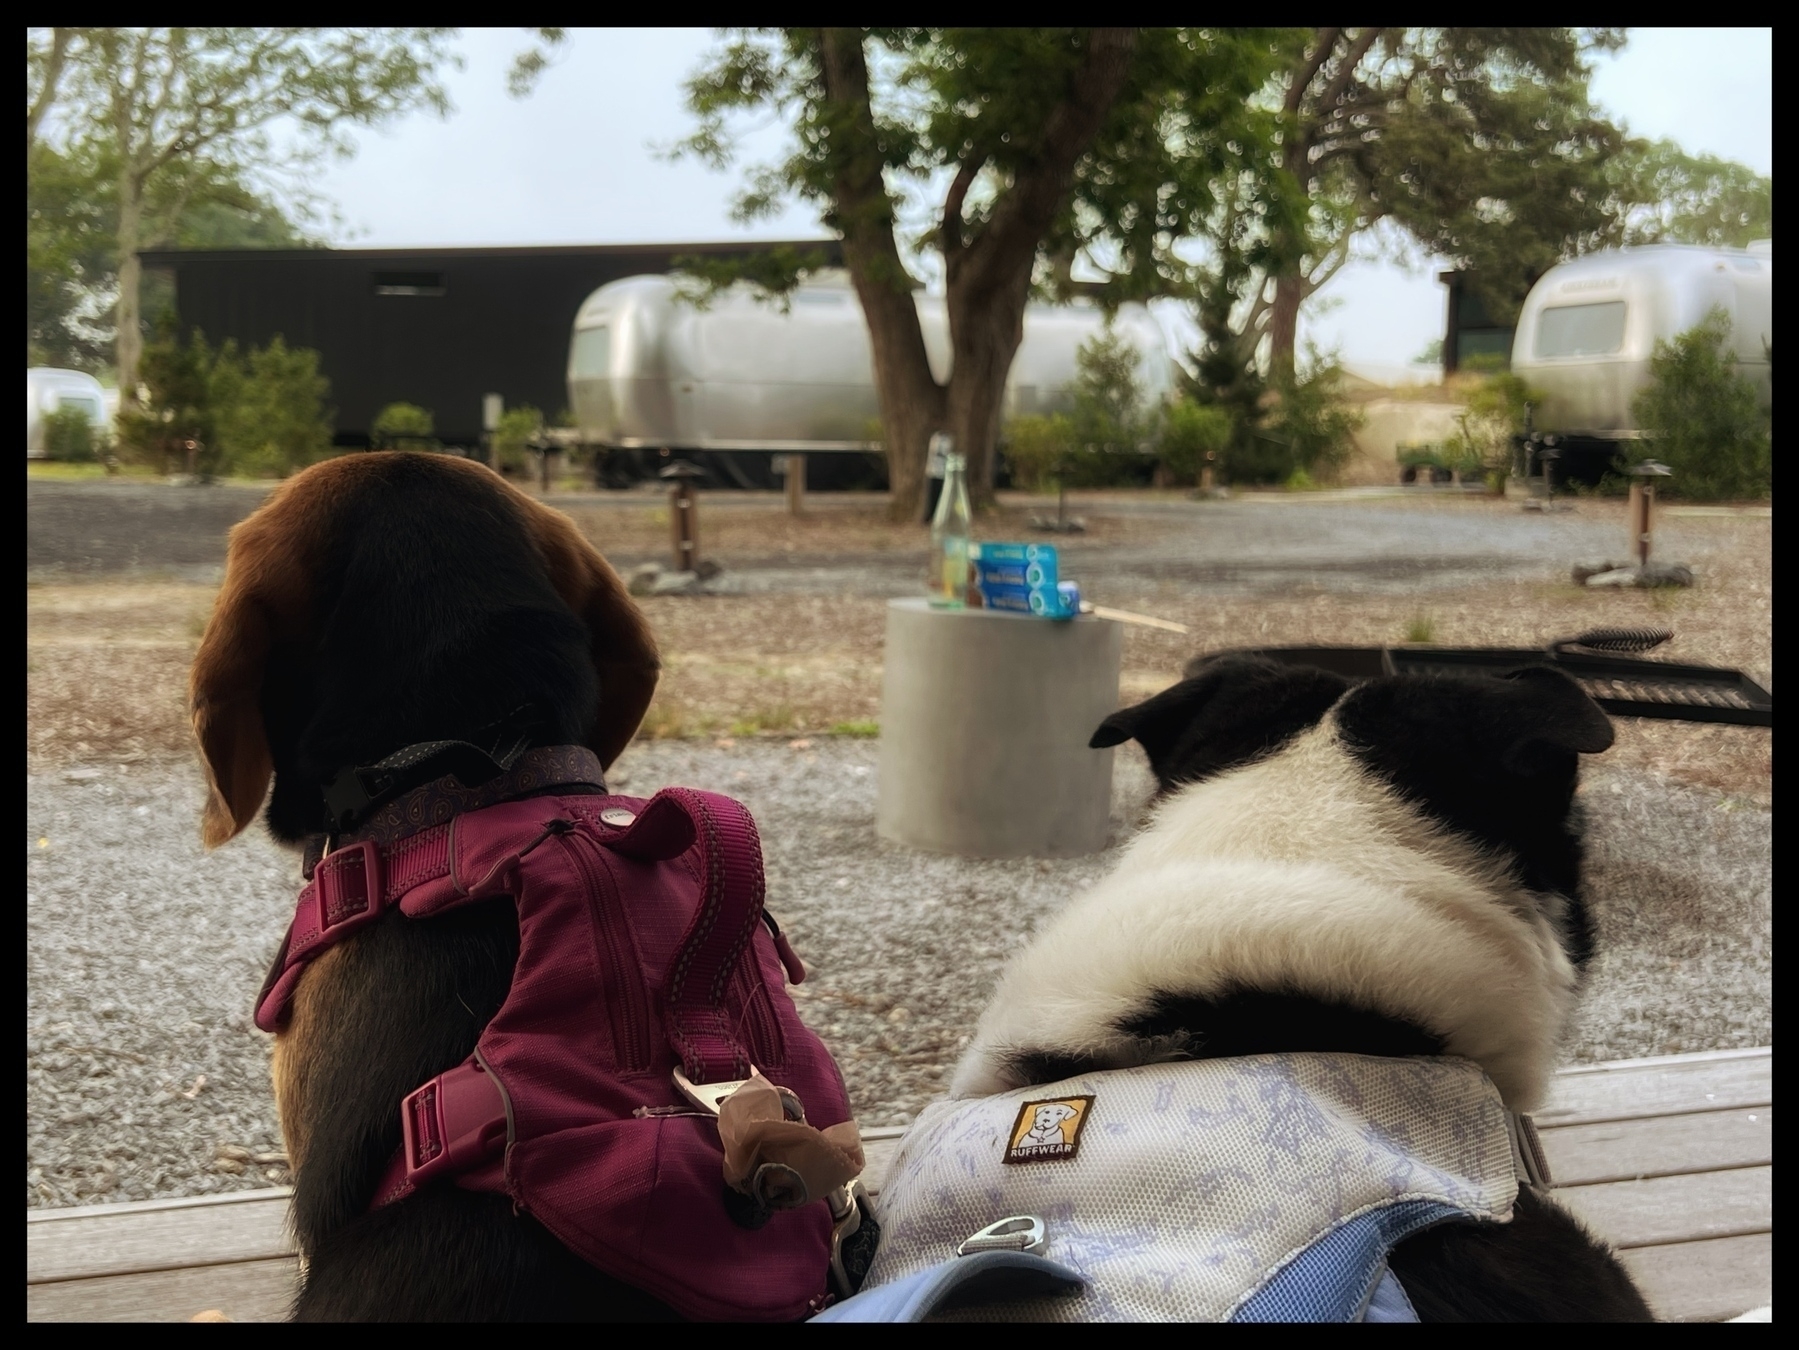 Profile (ish) shot of two dogs — a beagle in a pink harness on the left and a border collie in a blue and white harness o. The right. Both are looking out at the campground. 